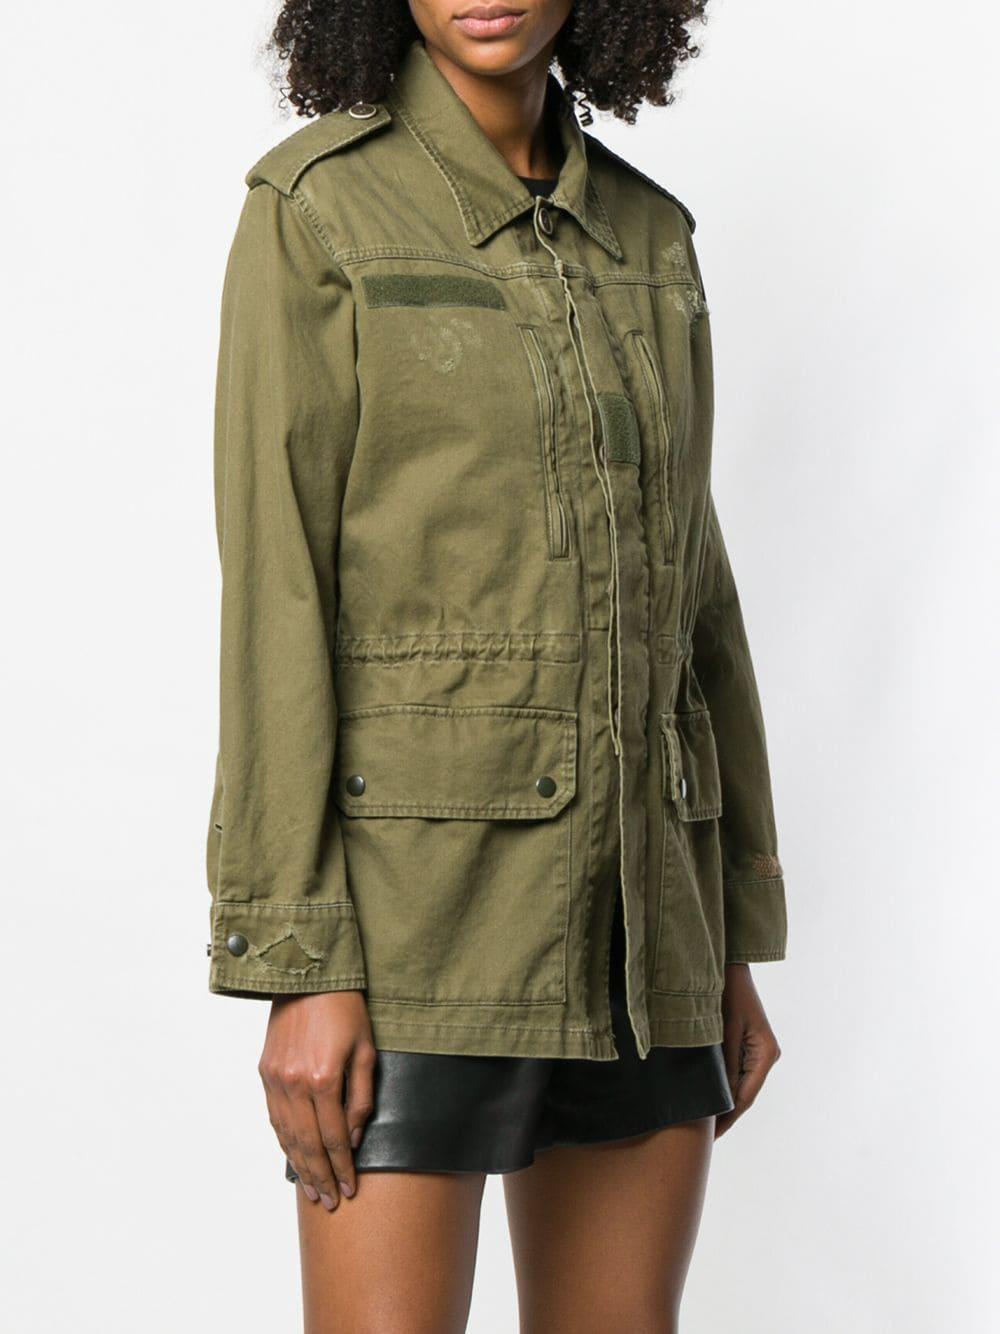 Saint Laurent Distressed Military Jacket in Green | Lyst